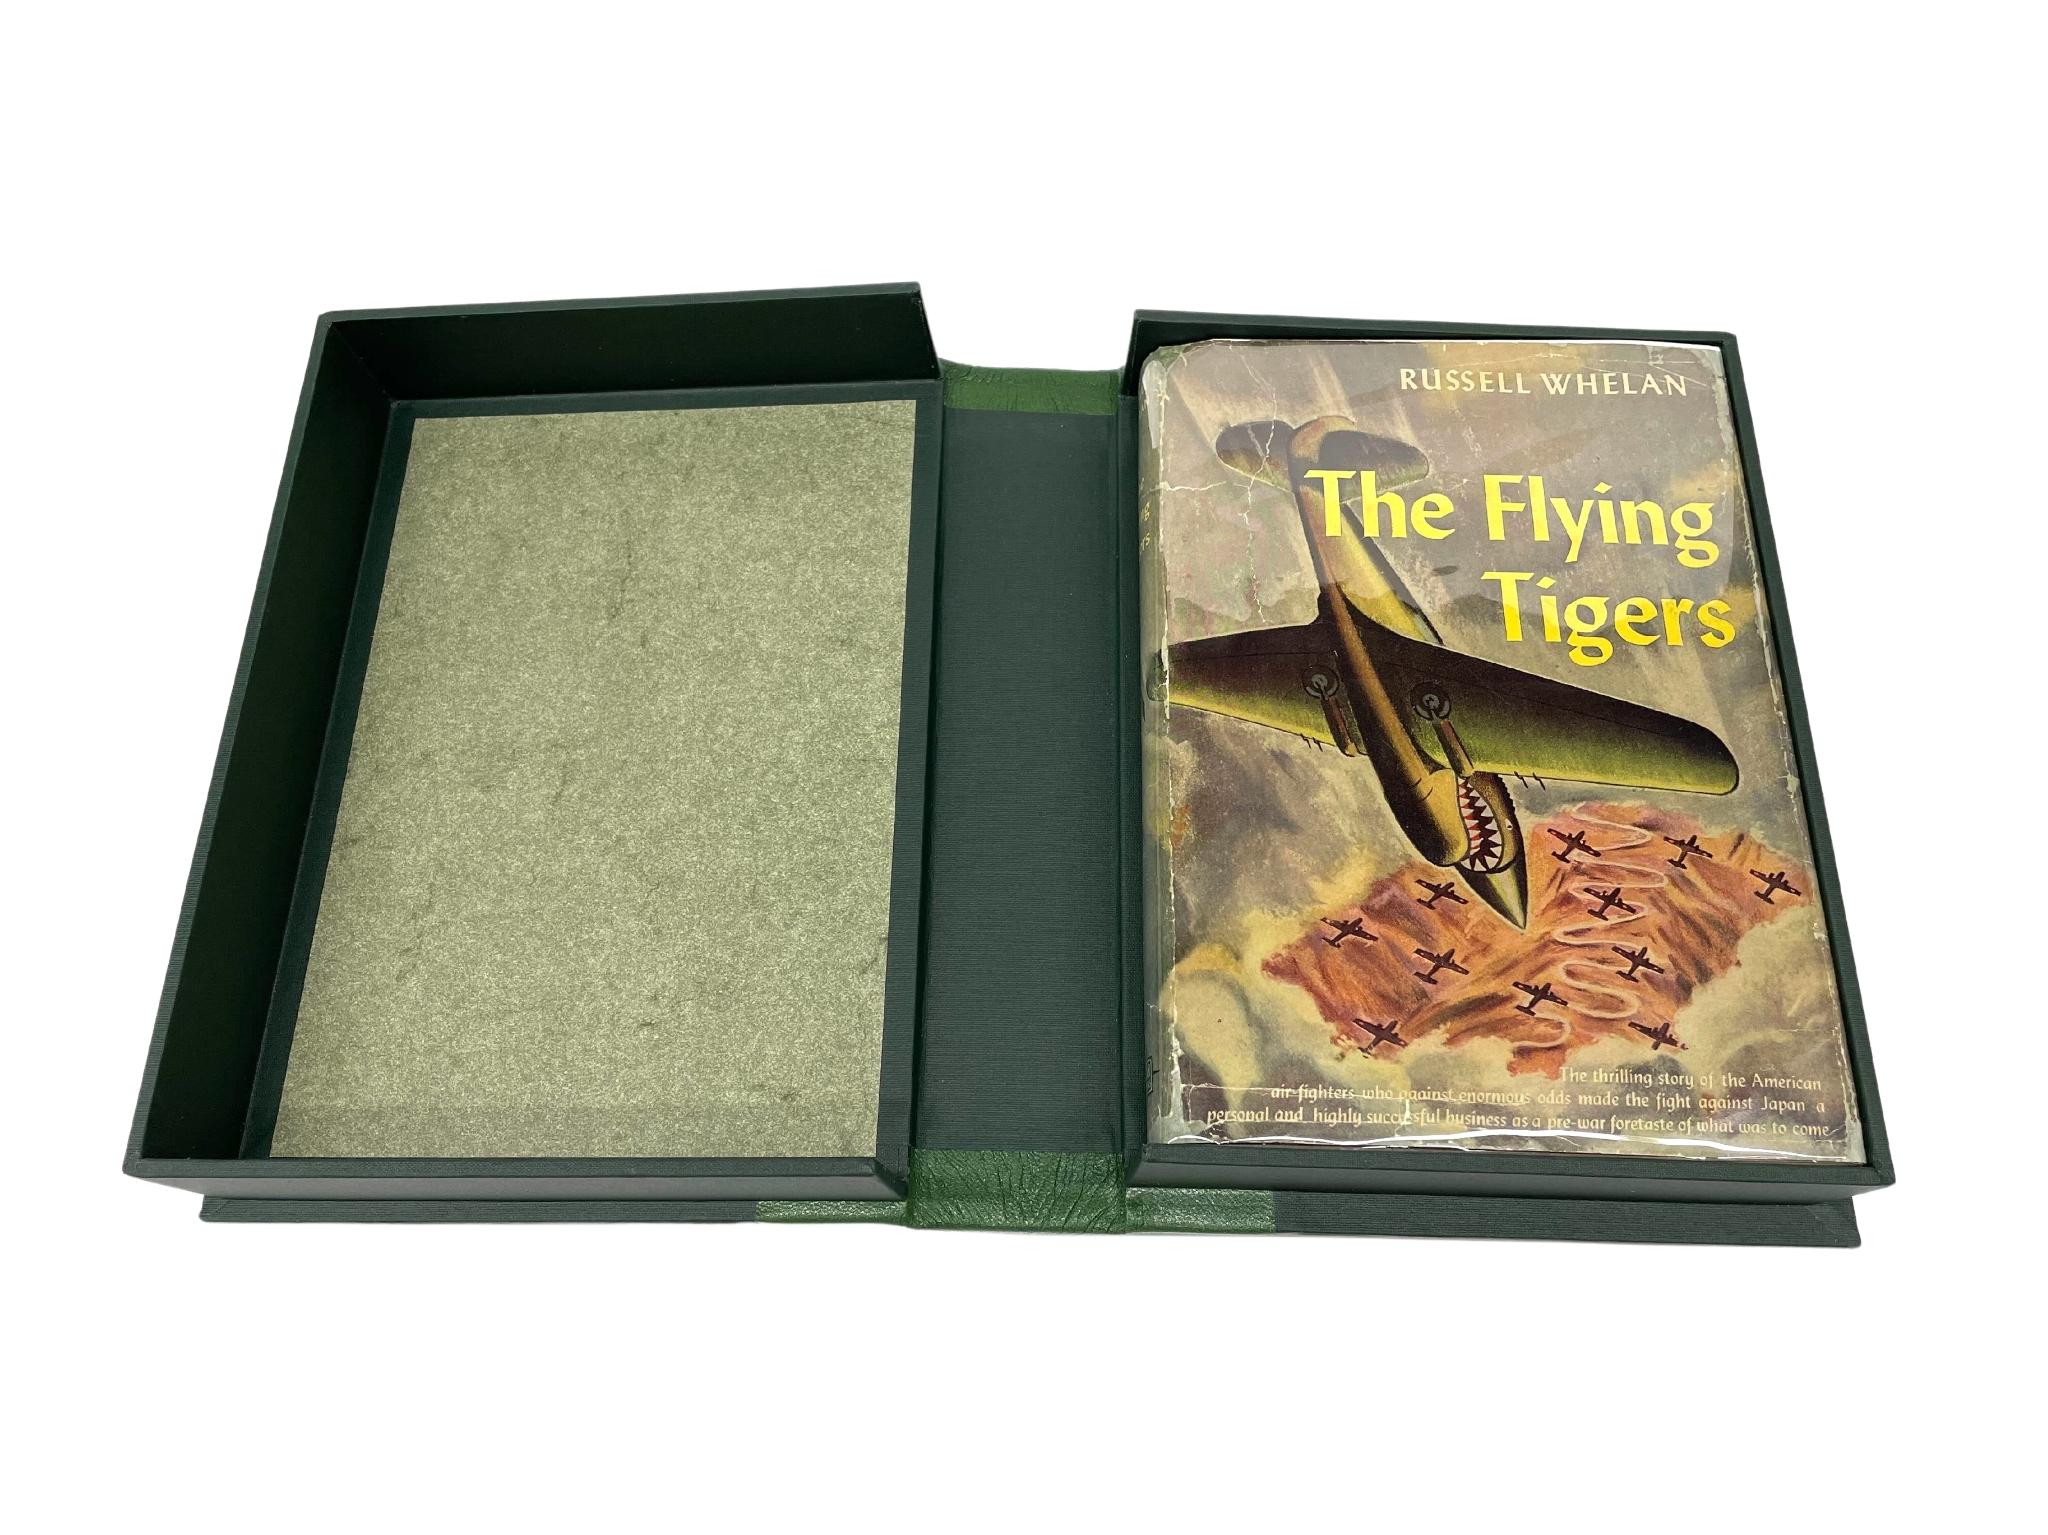 Whelan, Russell. The Flying Tigers. The Story of the American Volunteer Group. Garden City: Garden City Publishing Co., Inc., [1944]. Early edition. Signed by 17 members of the American Volunteer Group. 8vo. Publisher’s gray cloth, front board